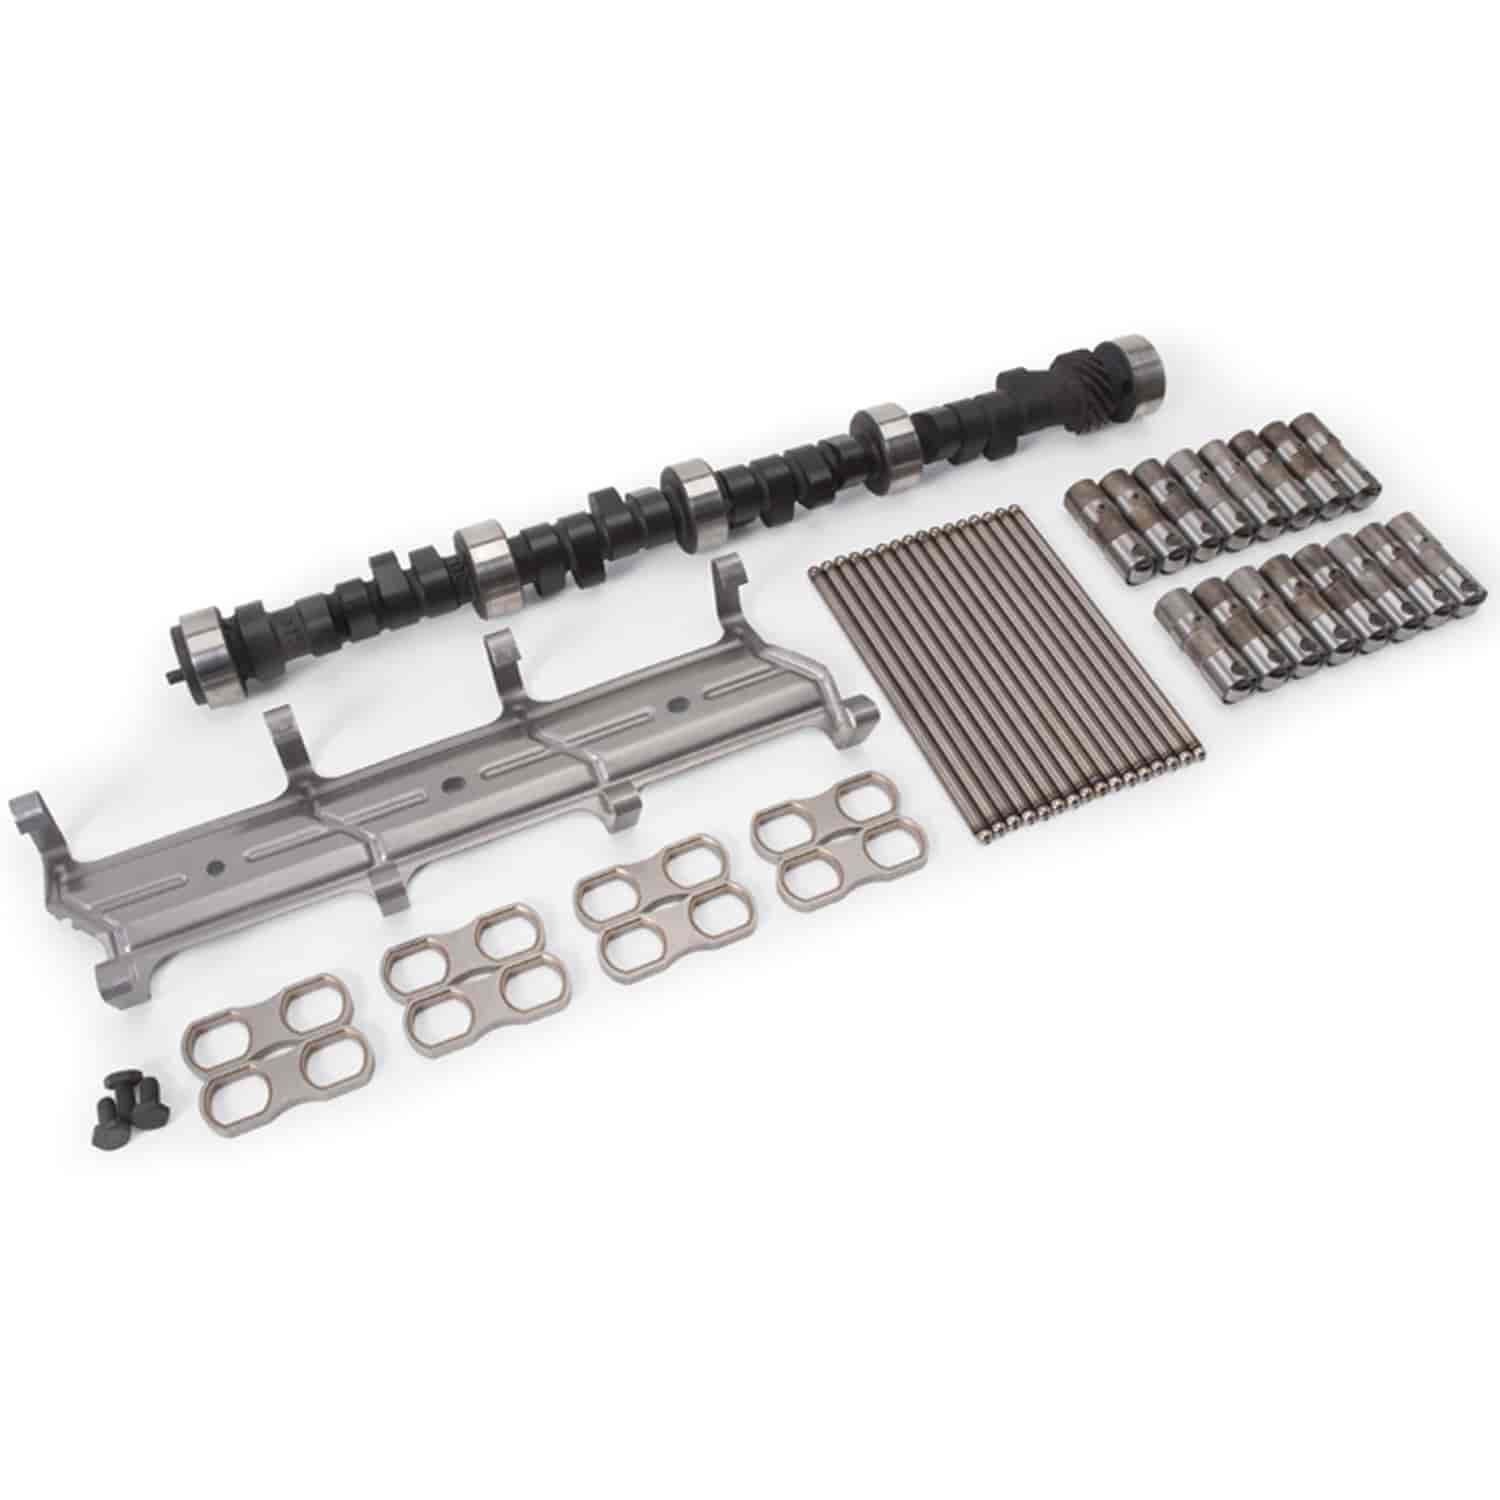 Rollin' Thunder Hydraulic Roller Camshaft Kit for 1987-Later Small Block Chevy 265-350